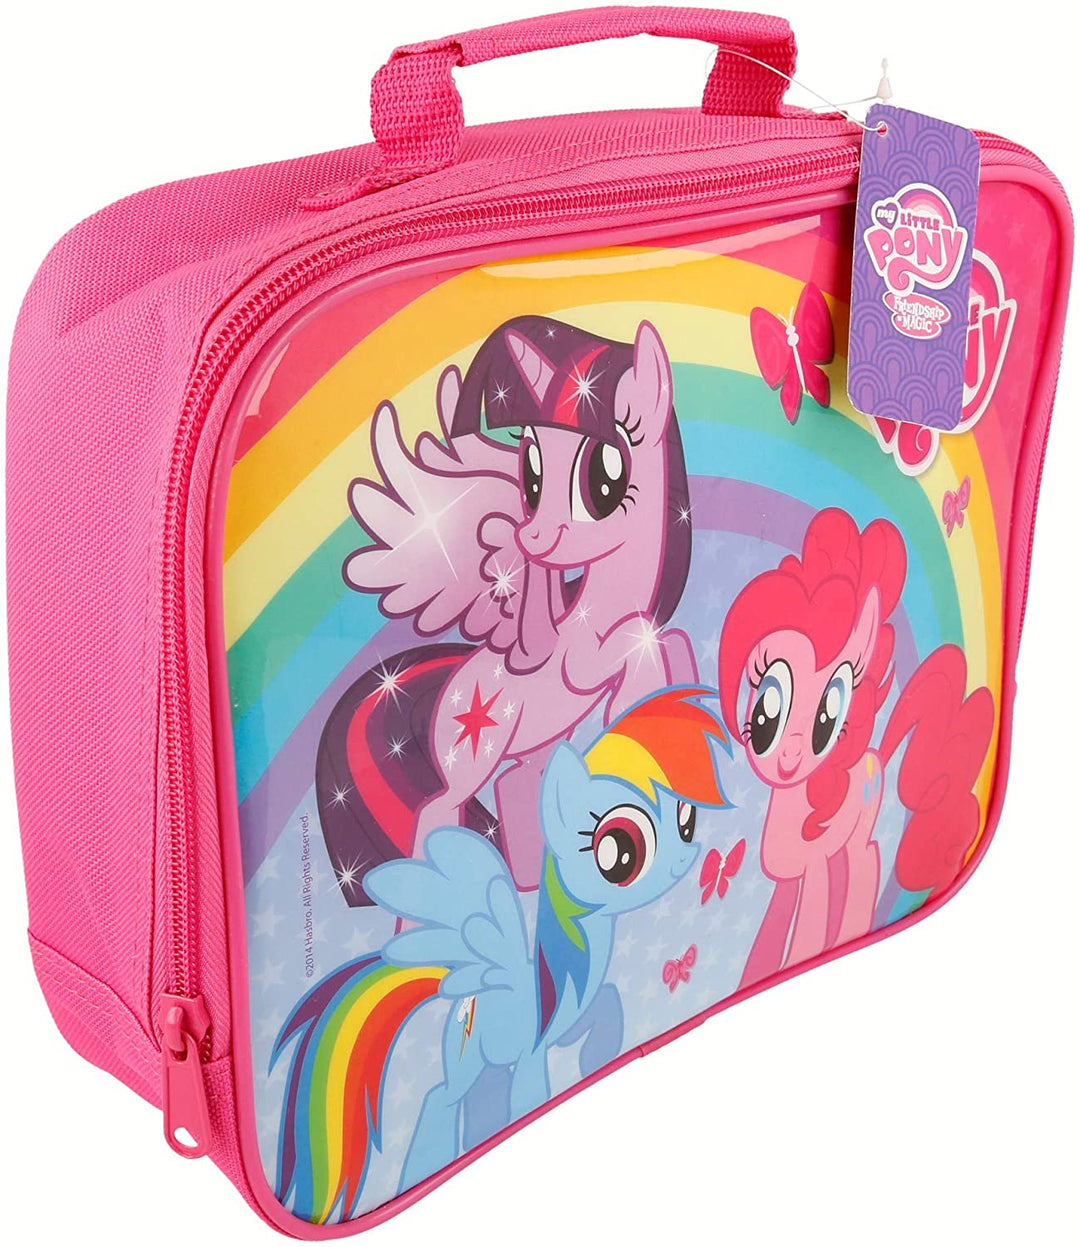 Boyz Toys ST350 Insulated Lunch Bag-My Little Pony, Polyester, Pink, 7 x 21 x 26 cm